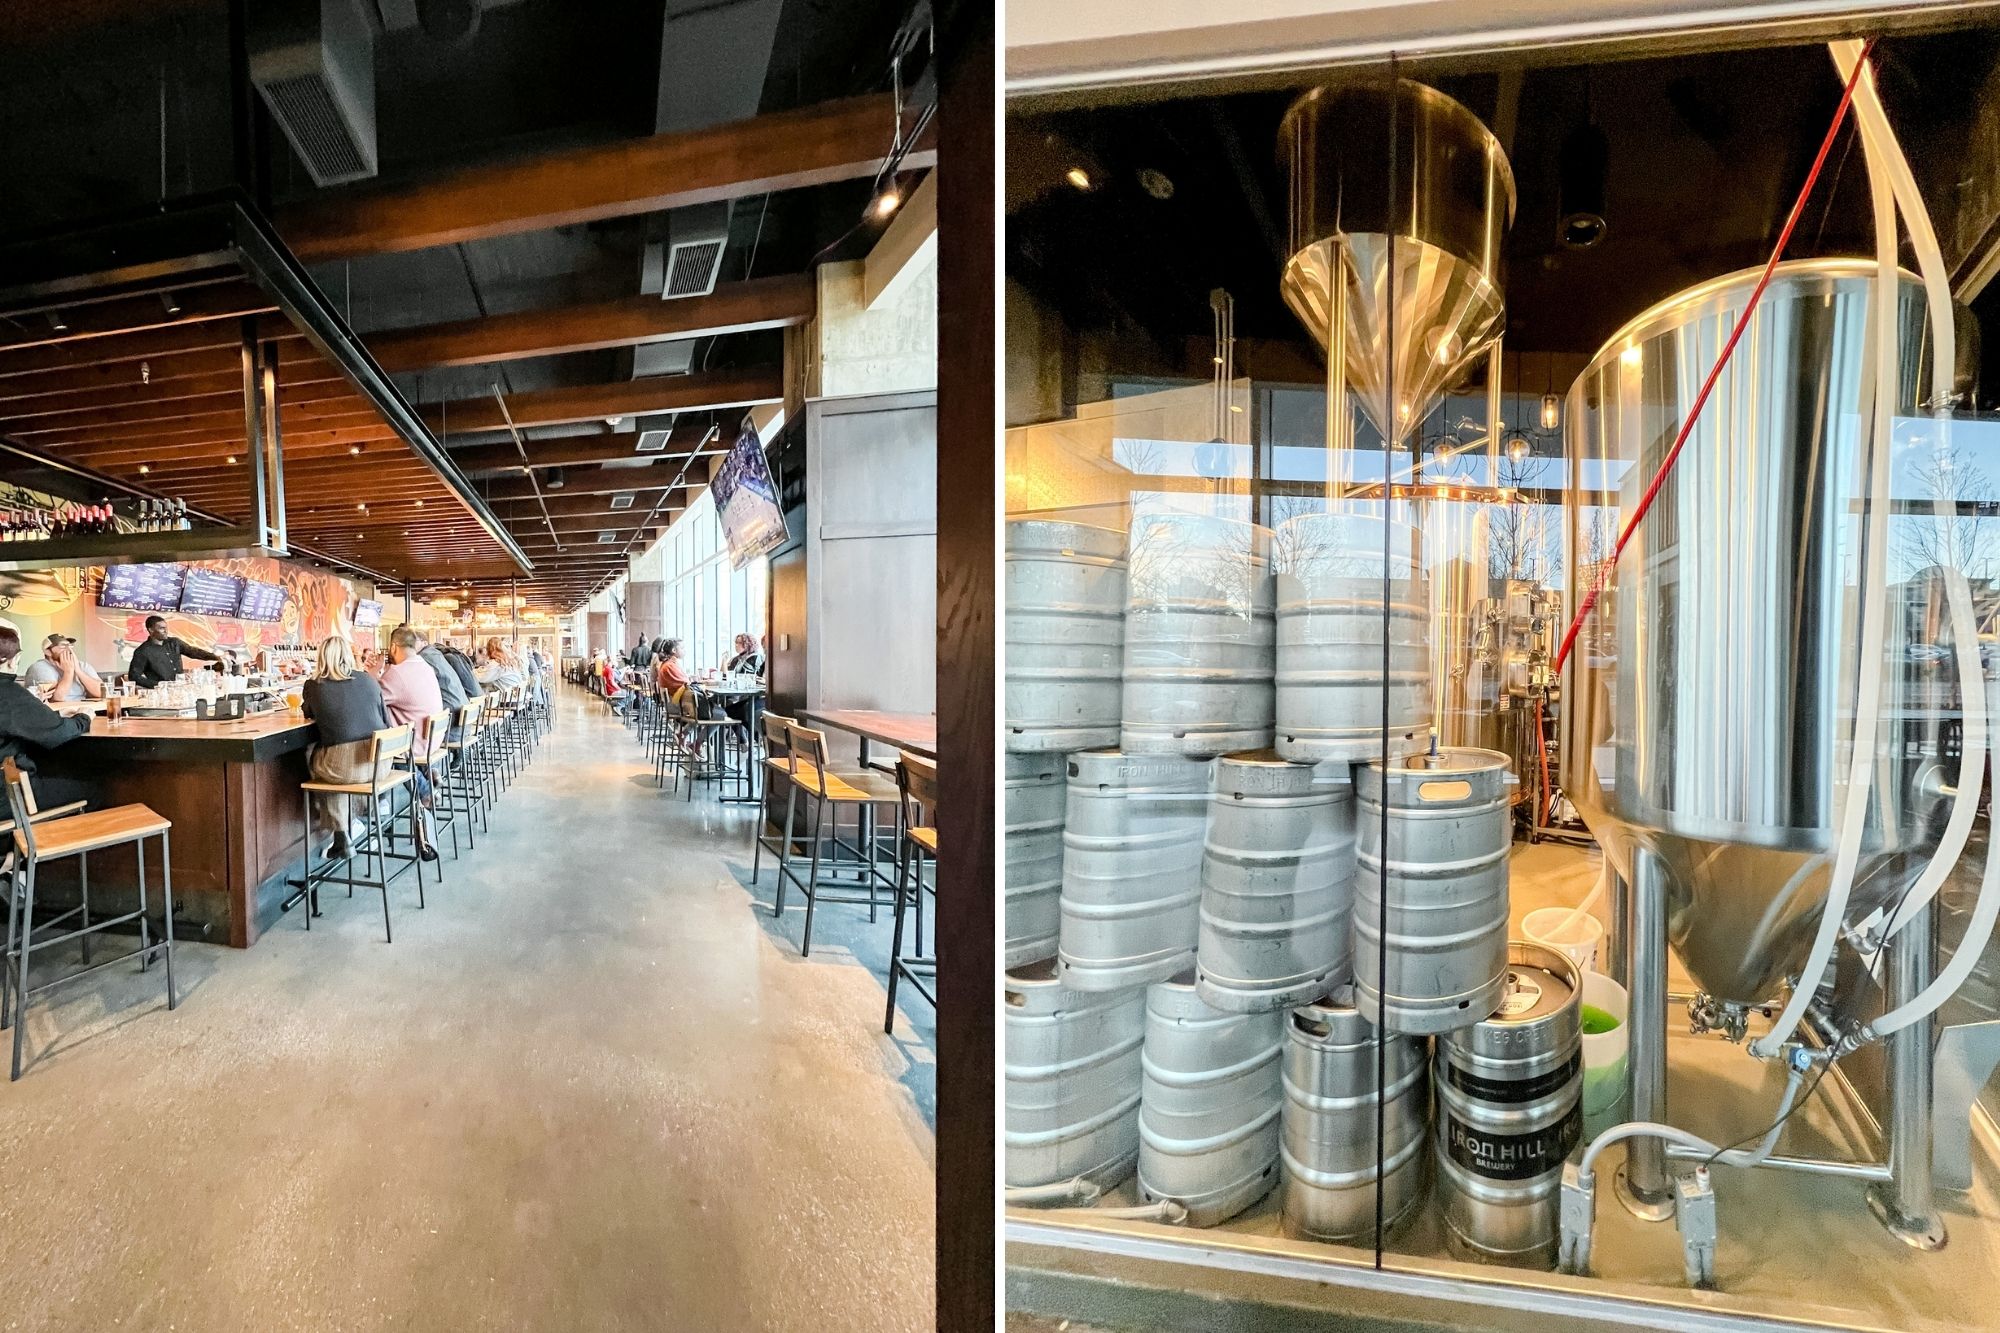 interior and brewing equipment at Iron Hill